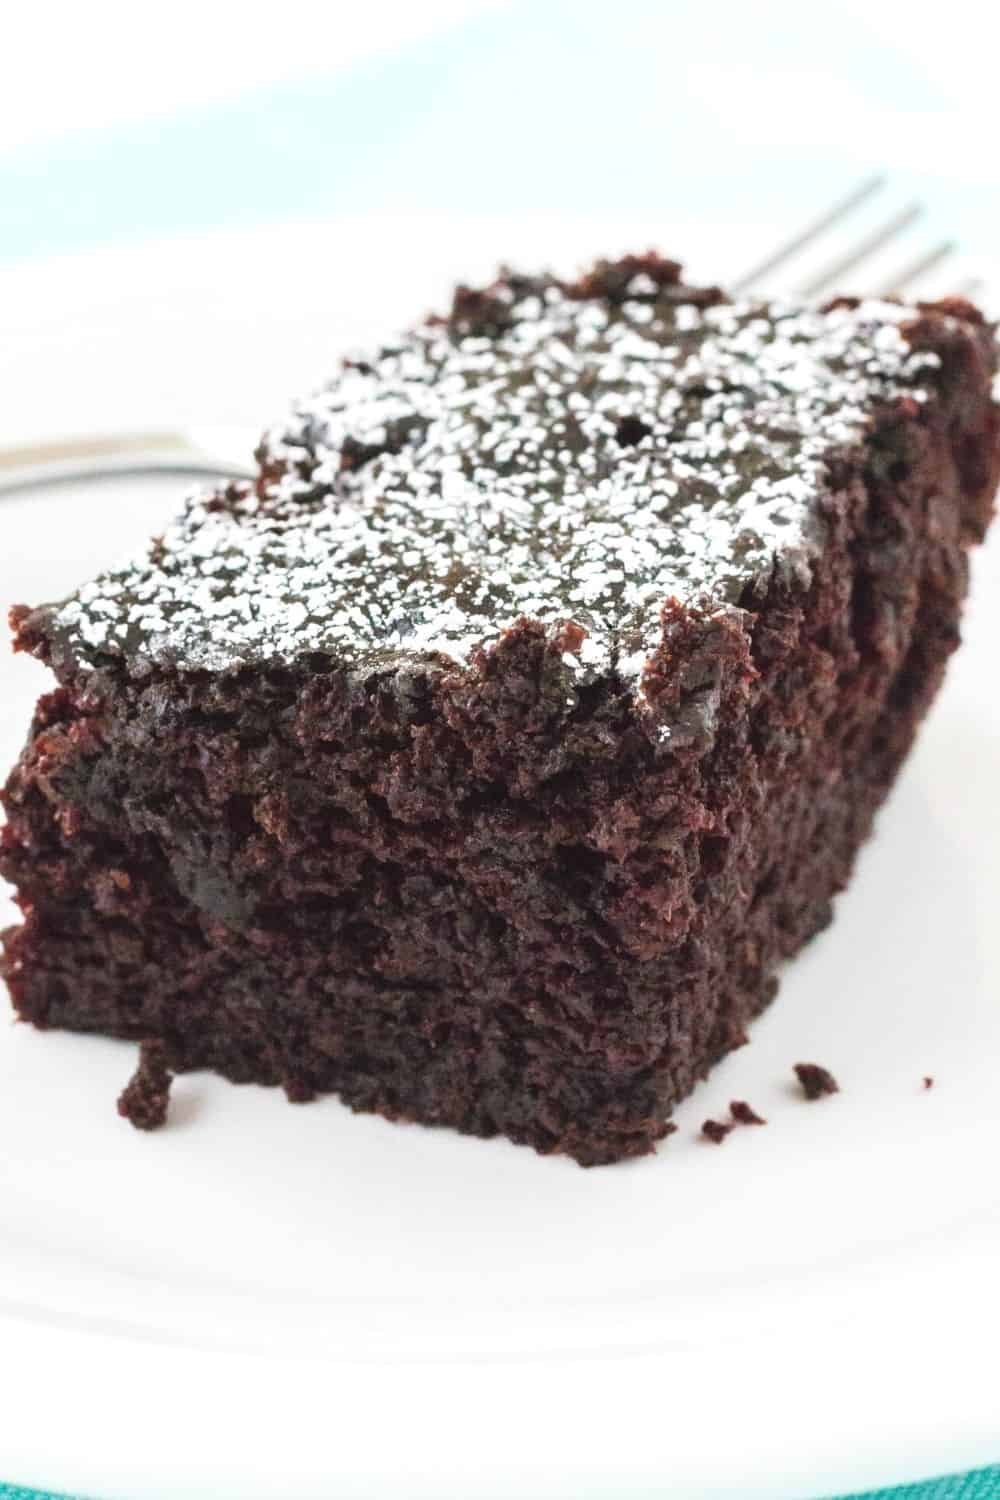 slice of decadent chocolate snack cake dusted with powdered sugar and served on a white plate